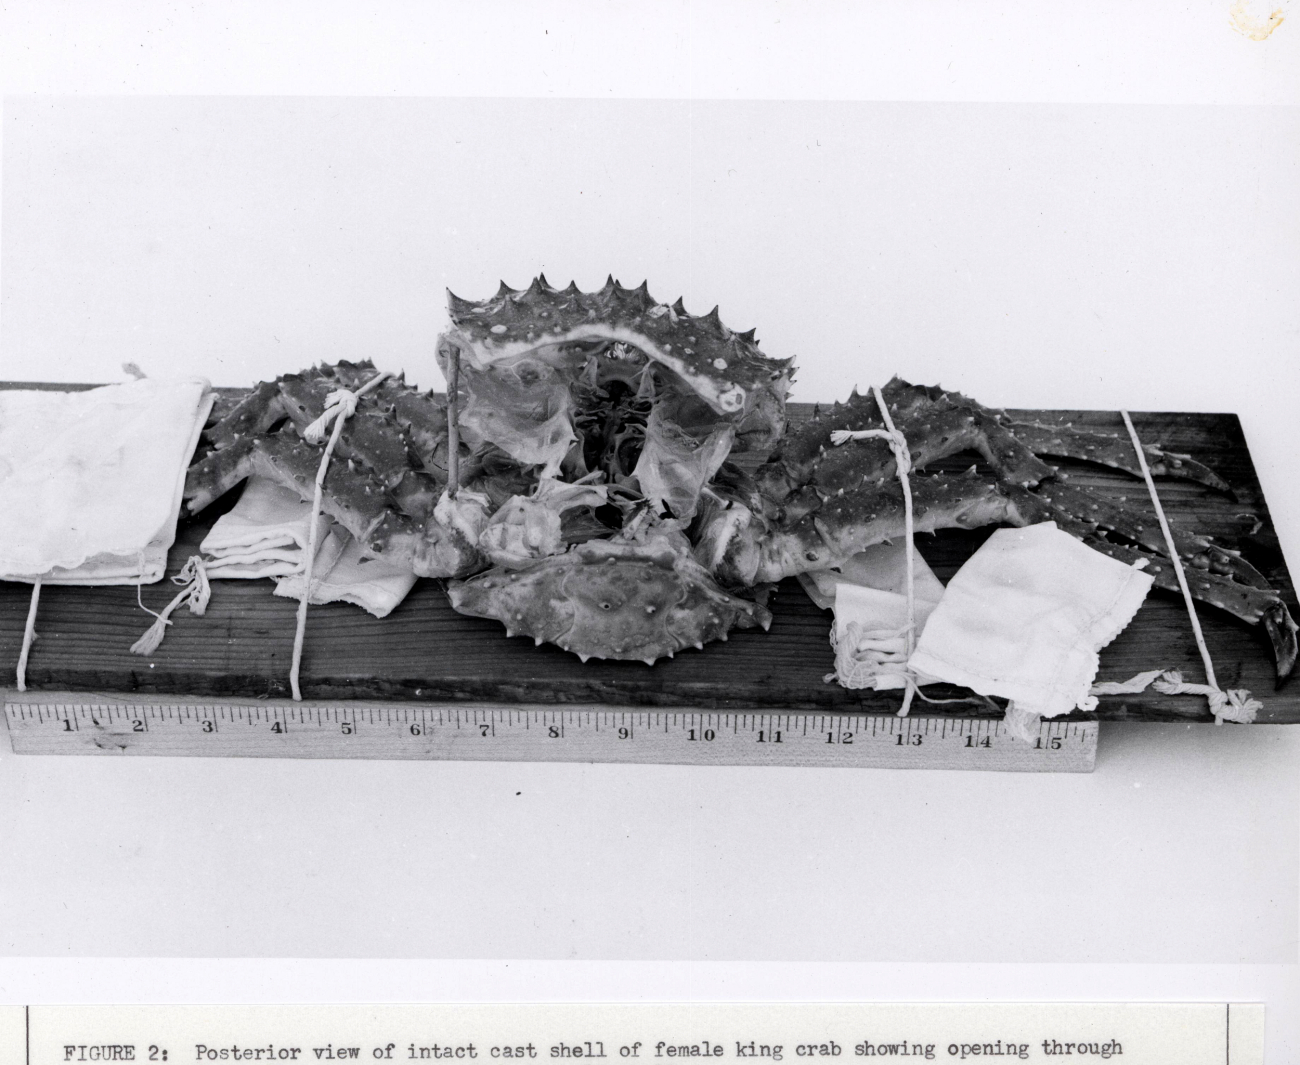 Posterior view of intact cast shell of female king crab showing opening throughwhich the crab emerges from the old shell